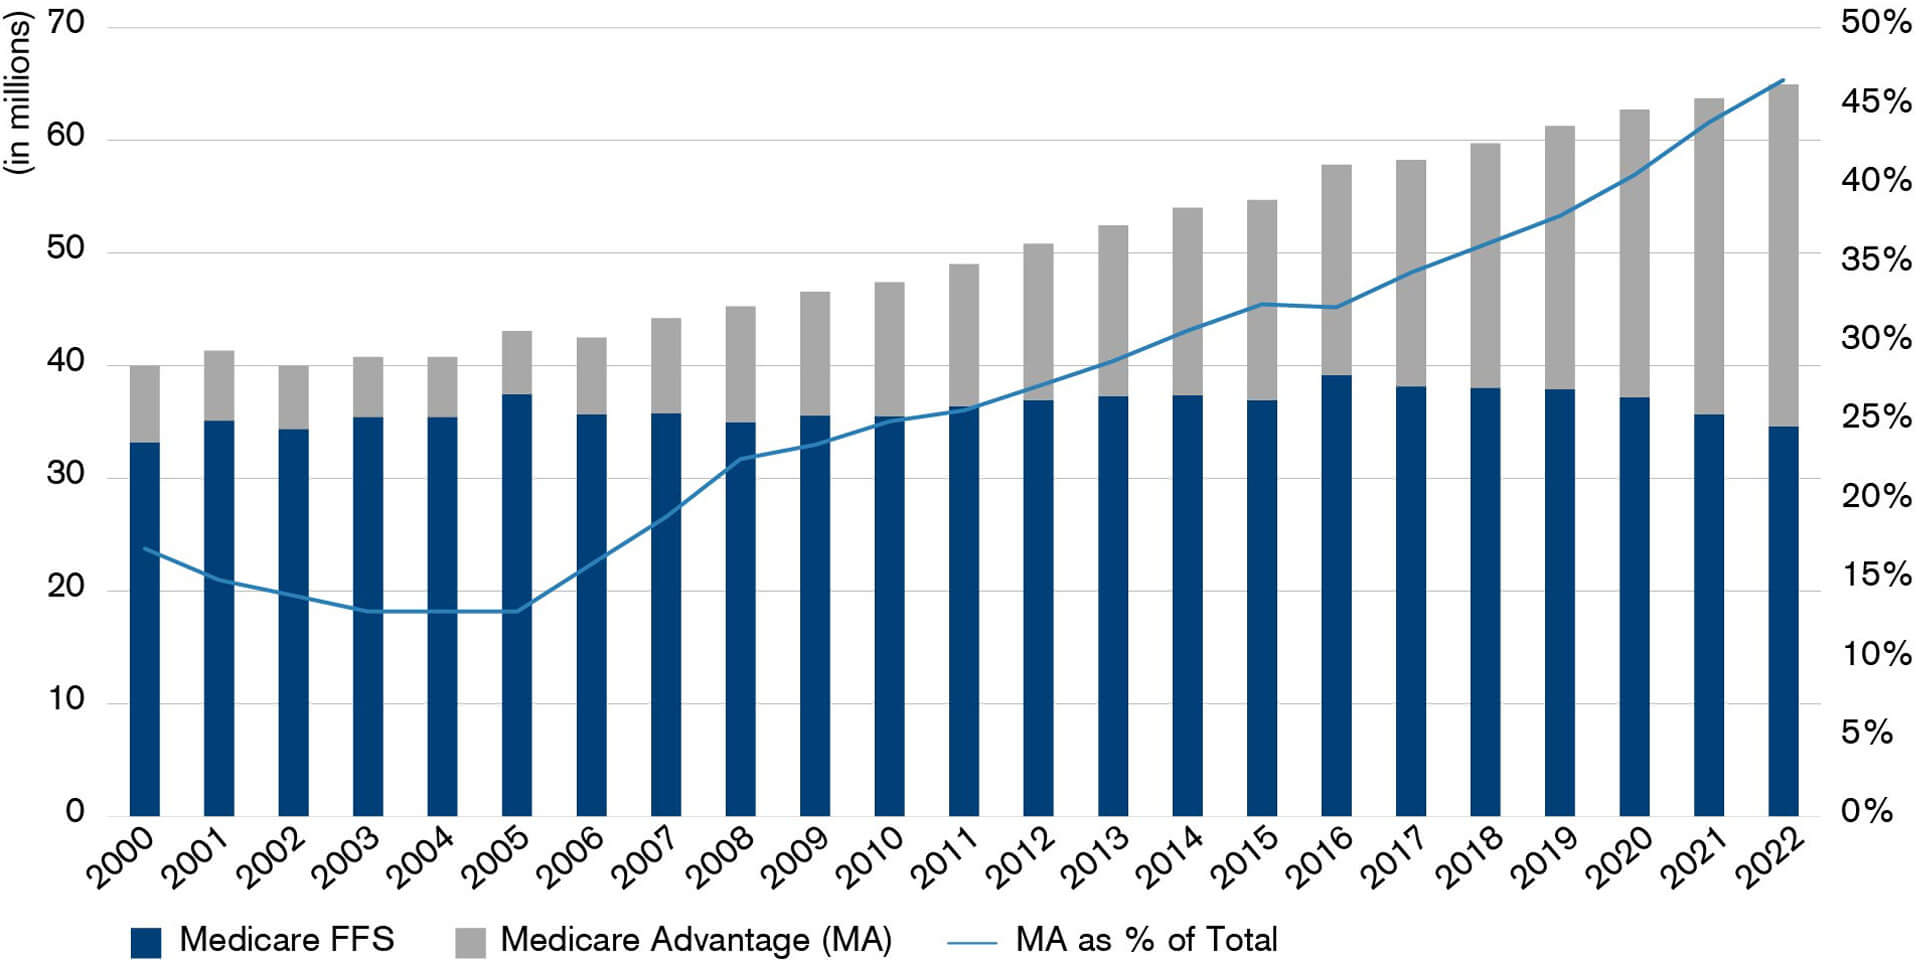 With enrollment growing at high single digit percentage points, year-on-year from 2010 to 2022, Medicare Advantage has now penetrated more than 45% of the 55 million beneficiaries of Medicare. It is still expected to add 1 to 2 million members per annum as baby boomers reach retirement age, reching a projected 43 million by 2030, almost double from 2020.